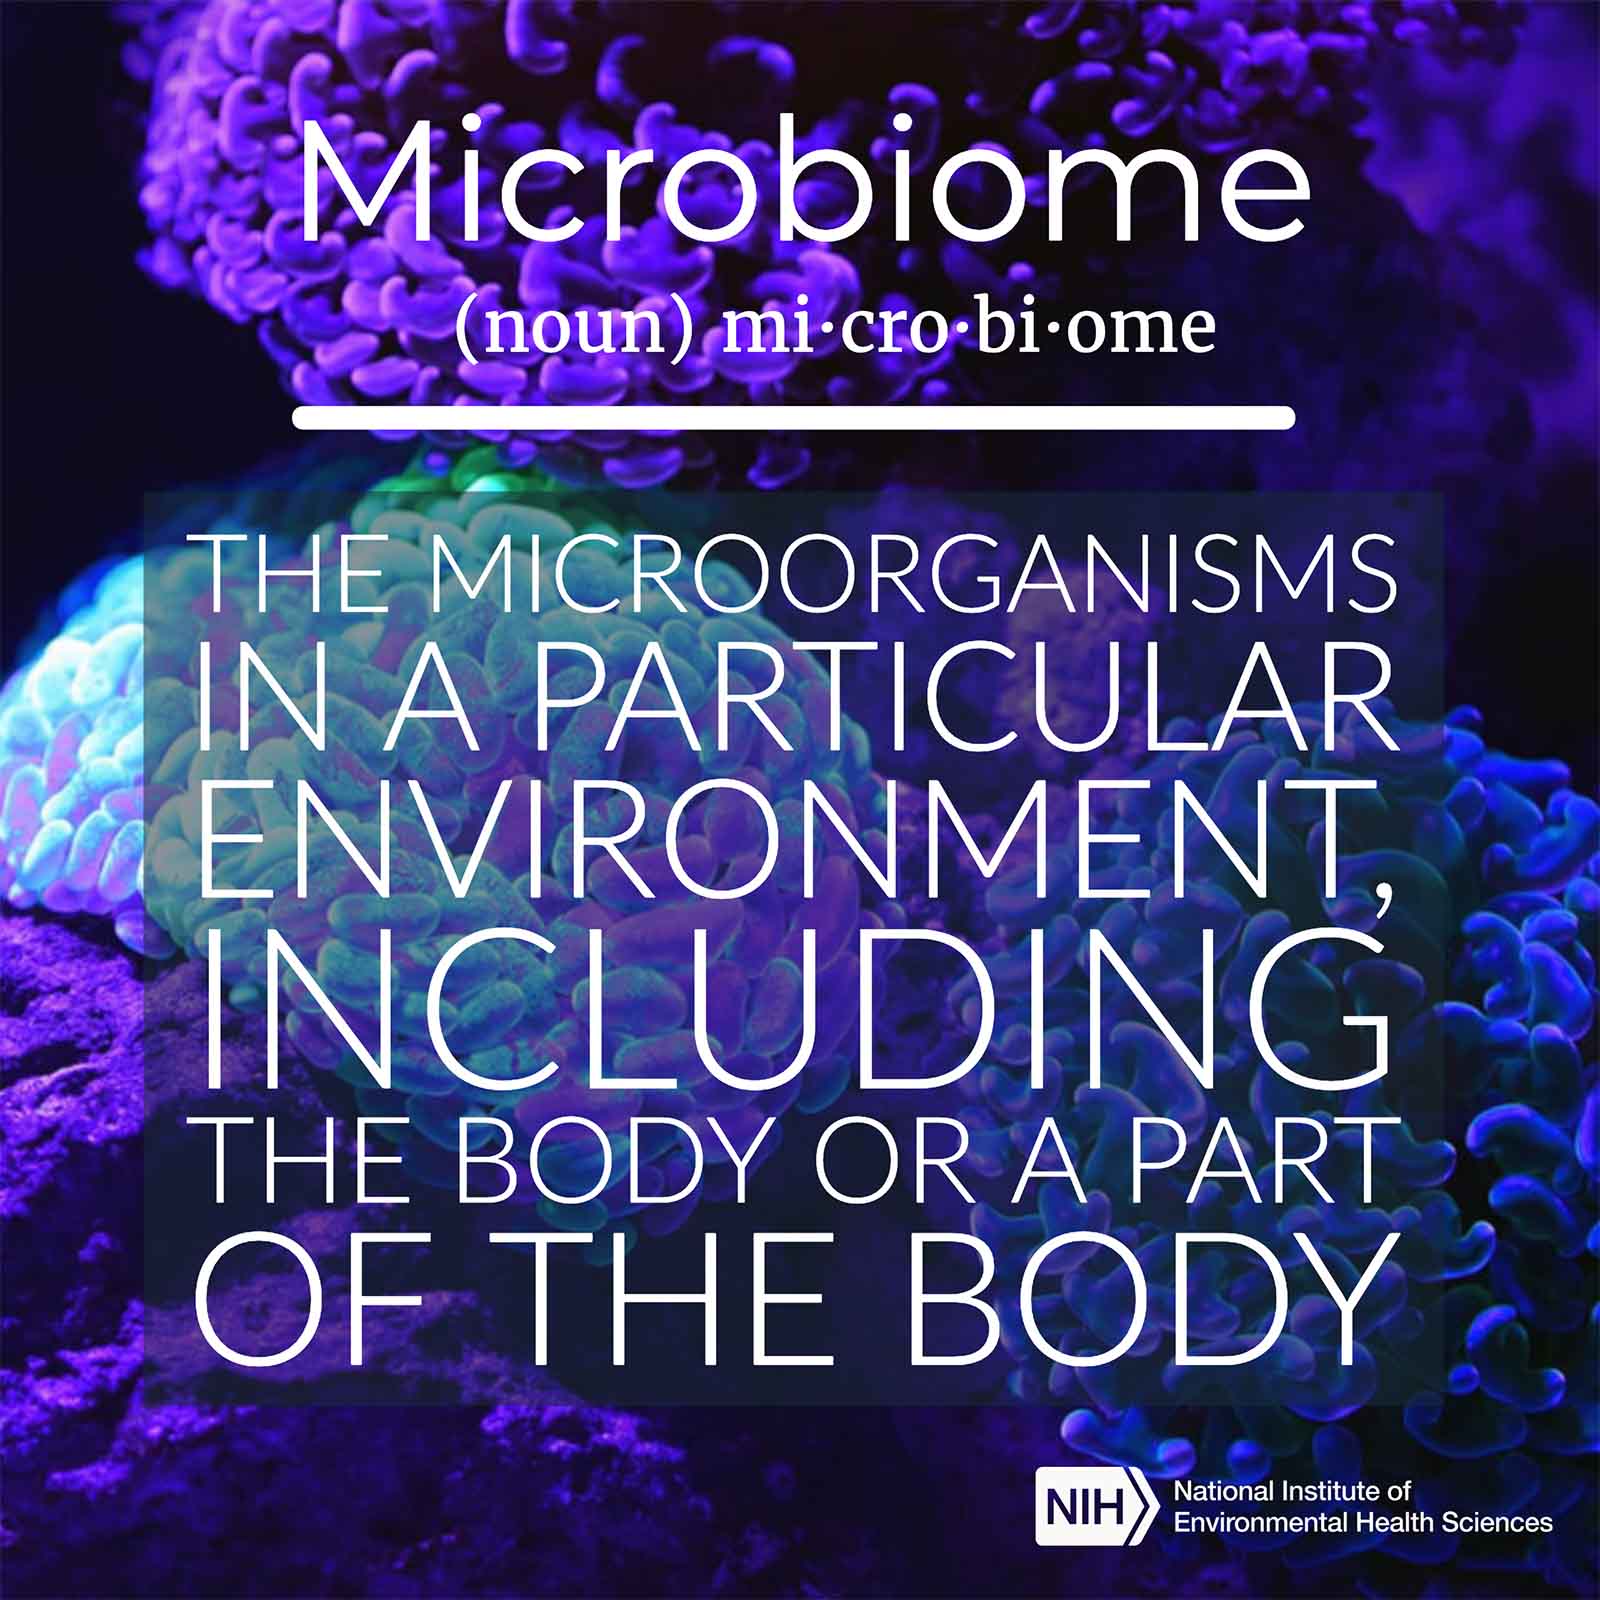 Microbiome definition The microorganisms in a particular environment, including the body or a part of the body